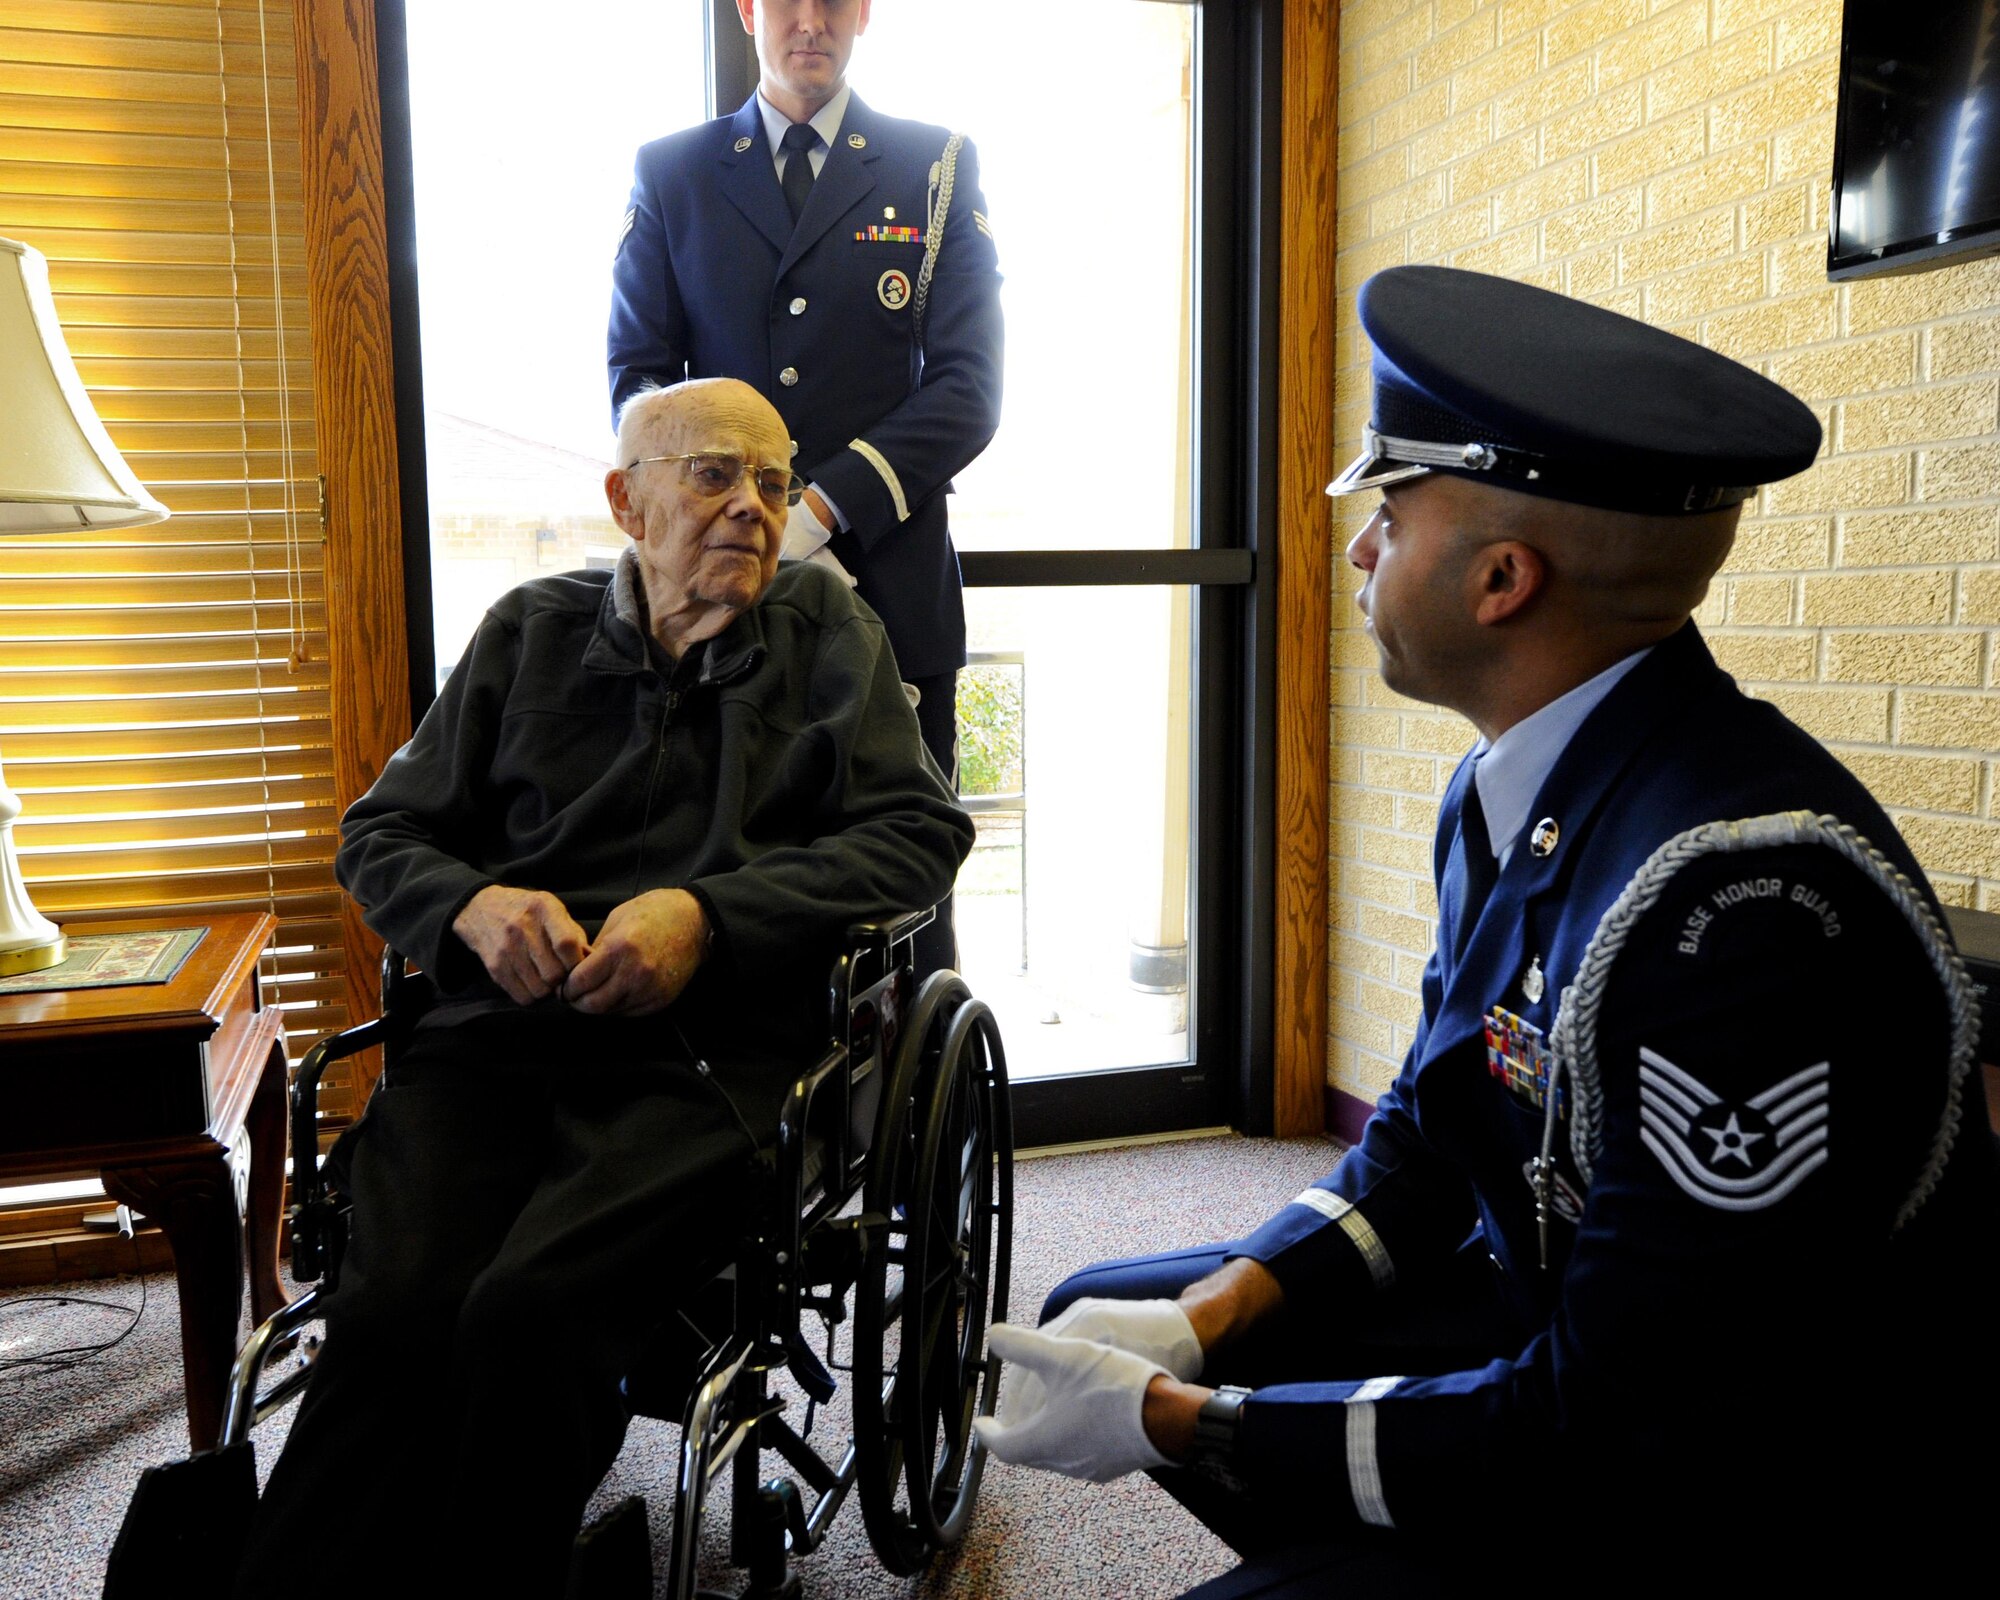 Roy Mullinax, a World War II Army veteran, speaks with Tech. Sgt. Terrance Williams, the 22nd Air Refueling Wing Honor Guard NCO in charge, during a recognition ceremony Dec. 8, 2015, in Newton, Kan. Mullinax enlisted in the Air Force shortly after the end of World War II, and his years of military service led to his recognition with a veteran’s pin through his hospice center. (U.S. Air Force photo/Senior Airman Victor J. Caputo)